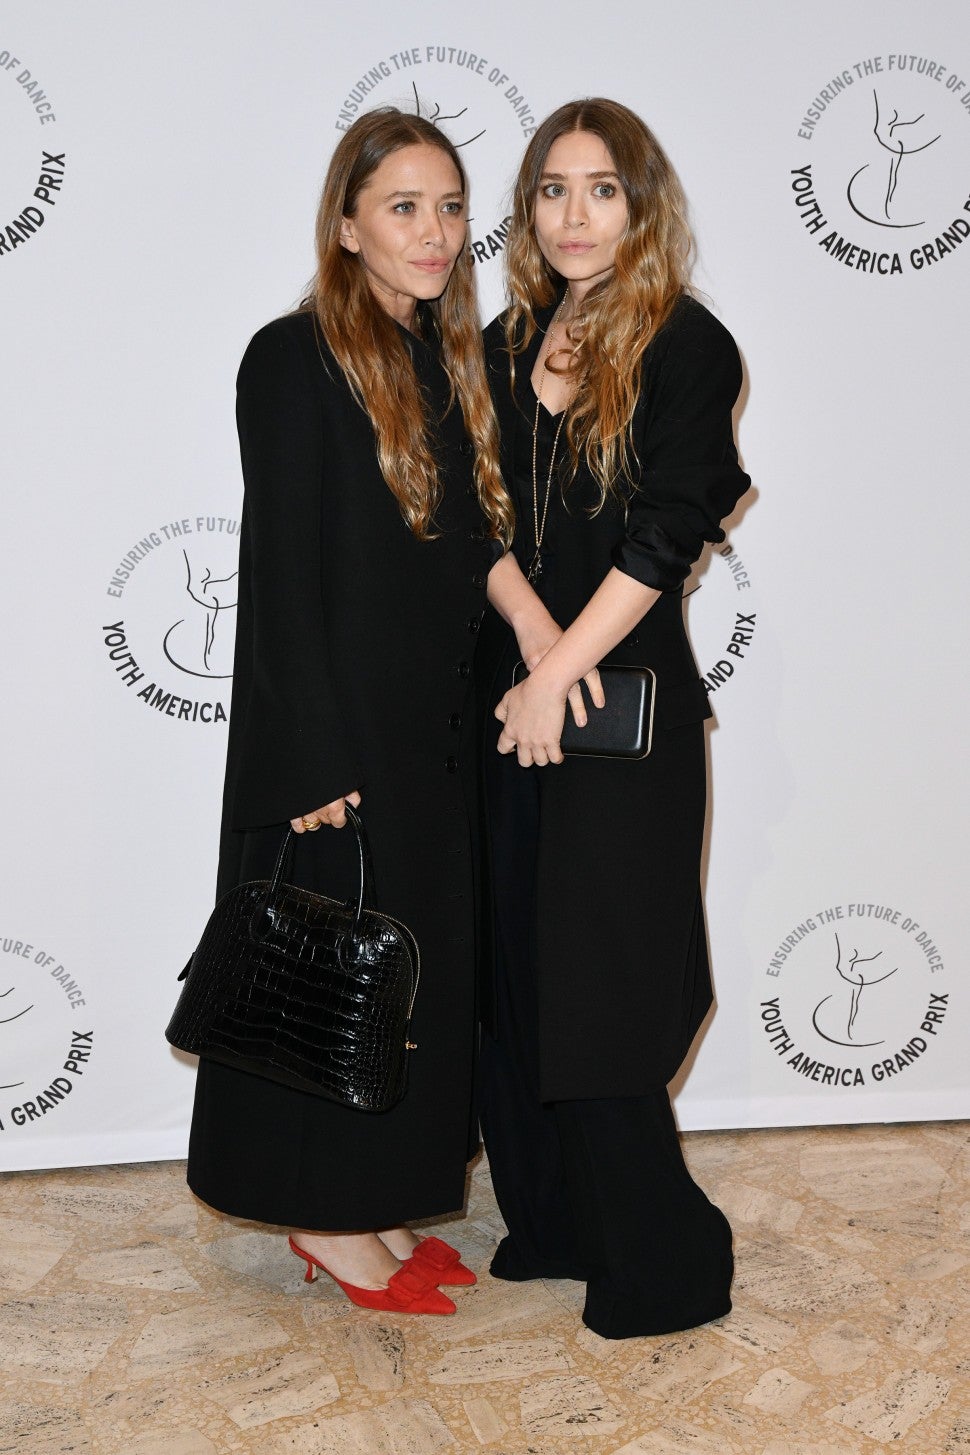 Mary-Kate and Ashley Are Twinning in Public Appearance | Entertainment Tonight